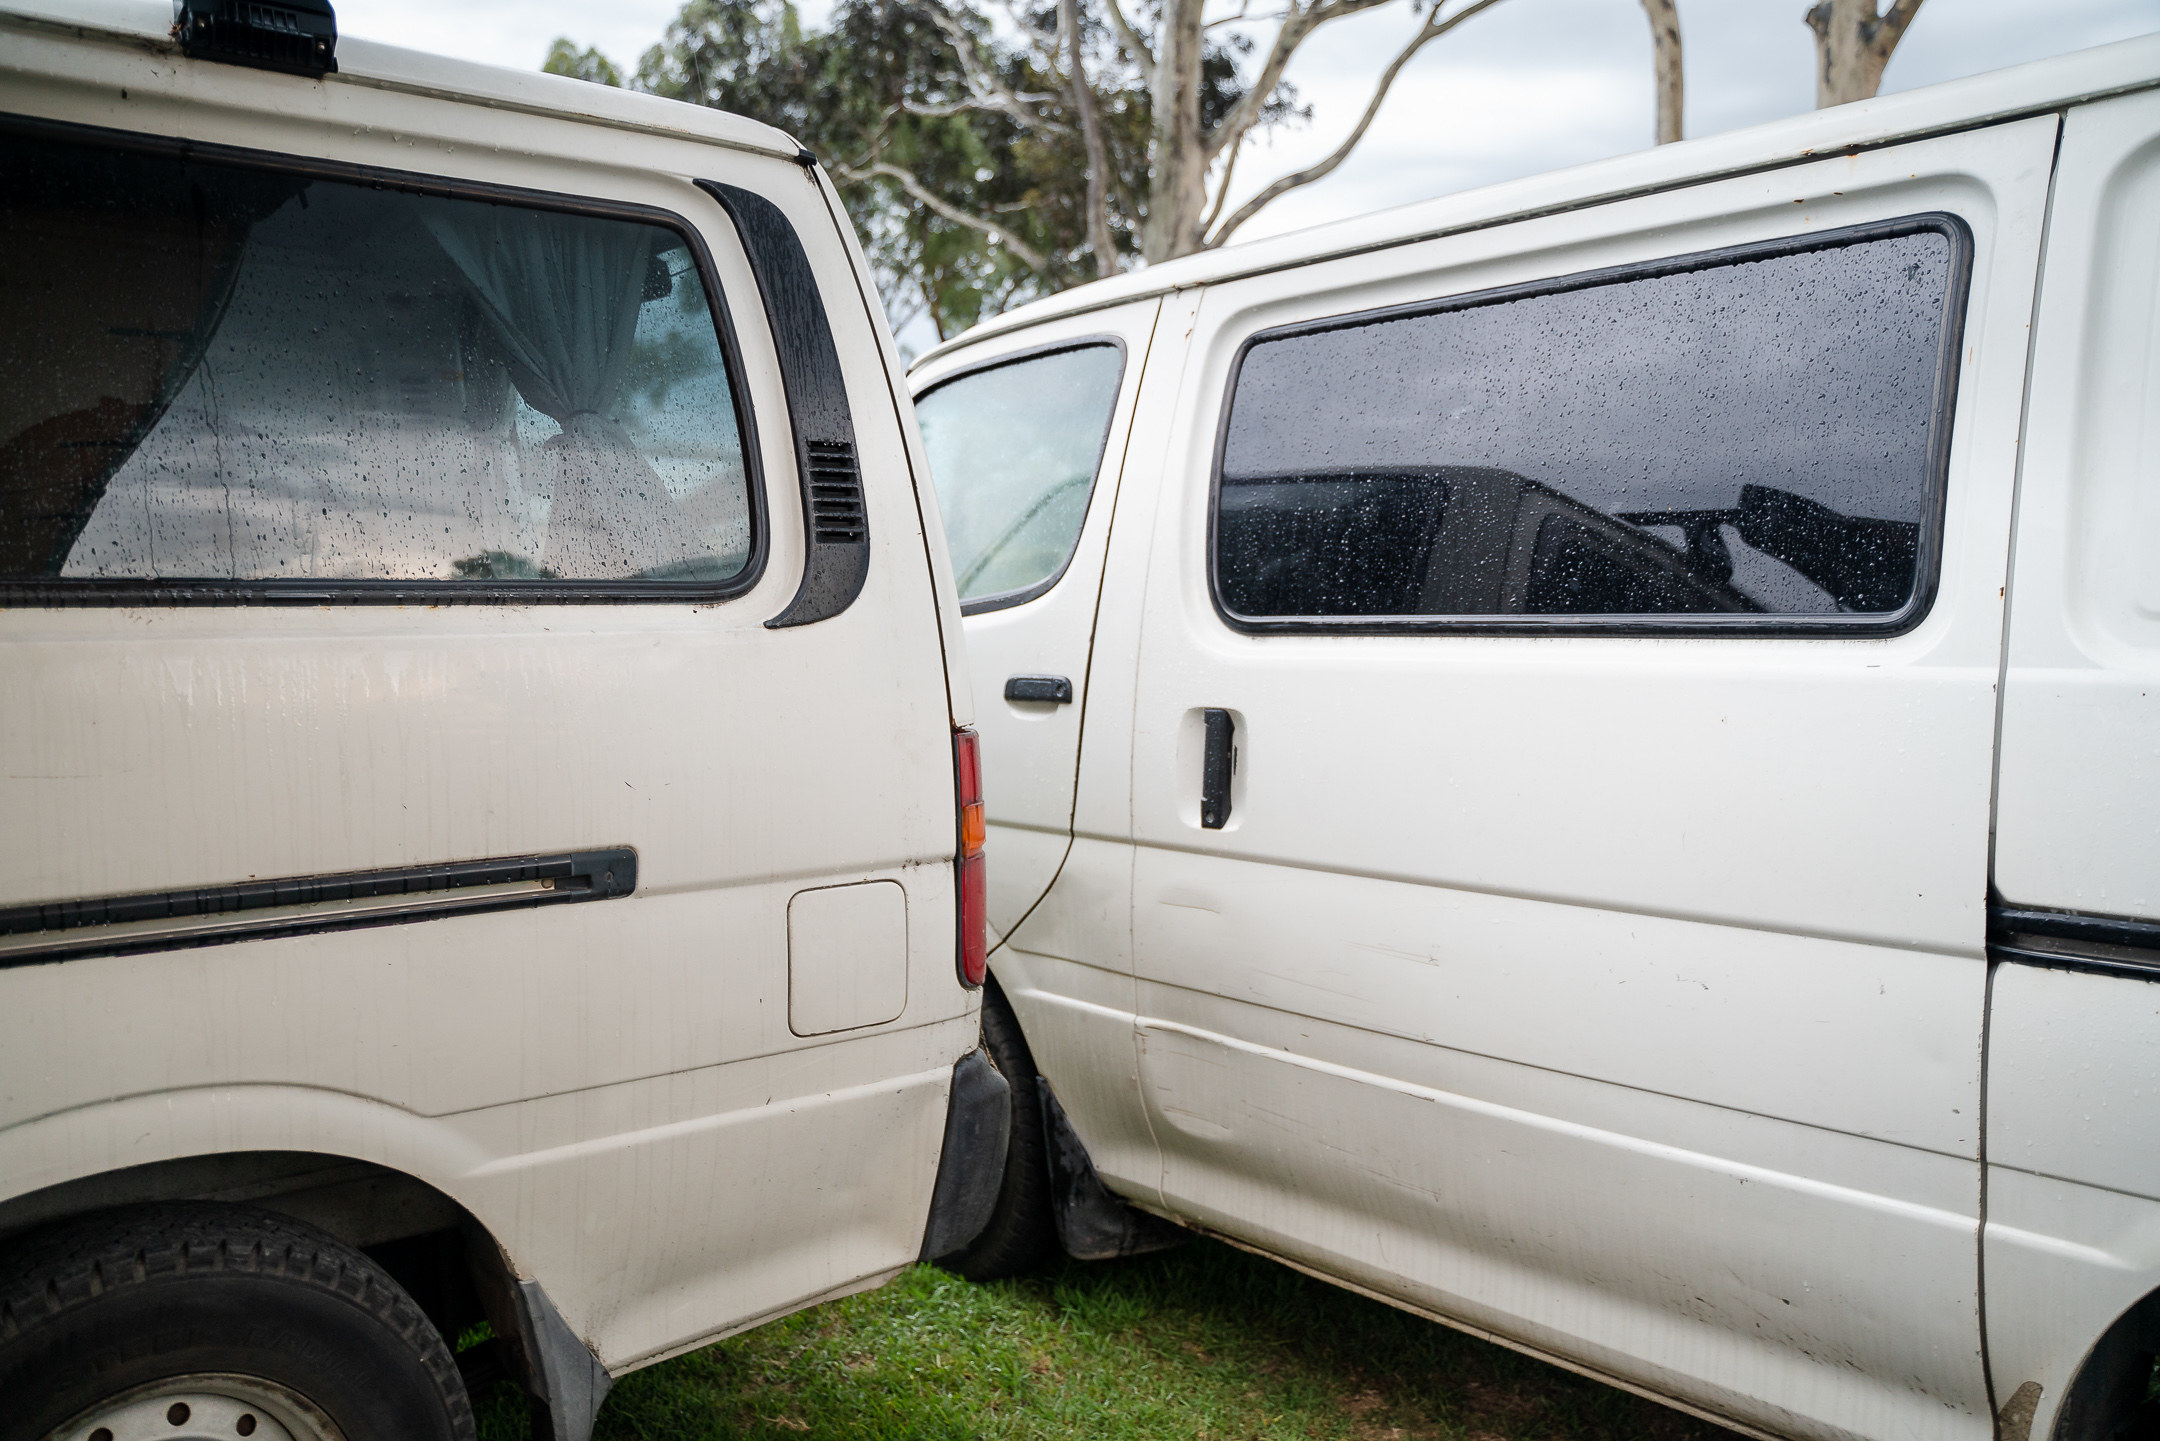 Photo of two vans parked very close together